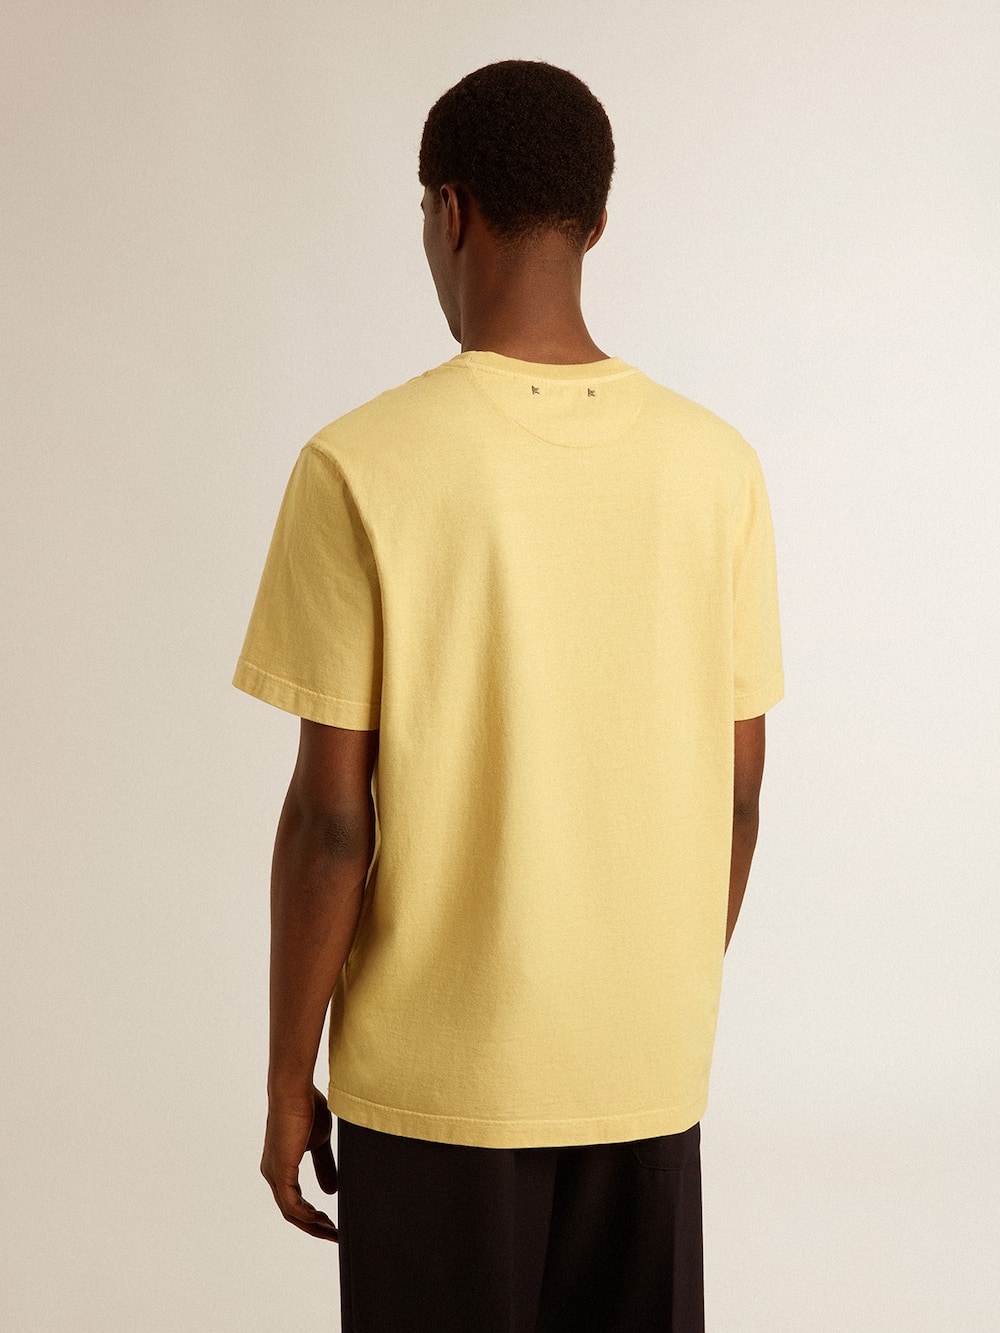 Golden Goose - Men's cotton T-shirt in pale yellow with faded lettering in 